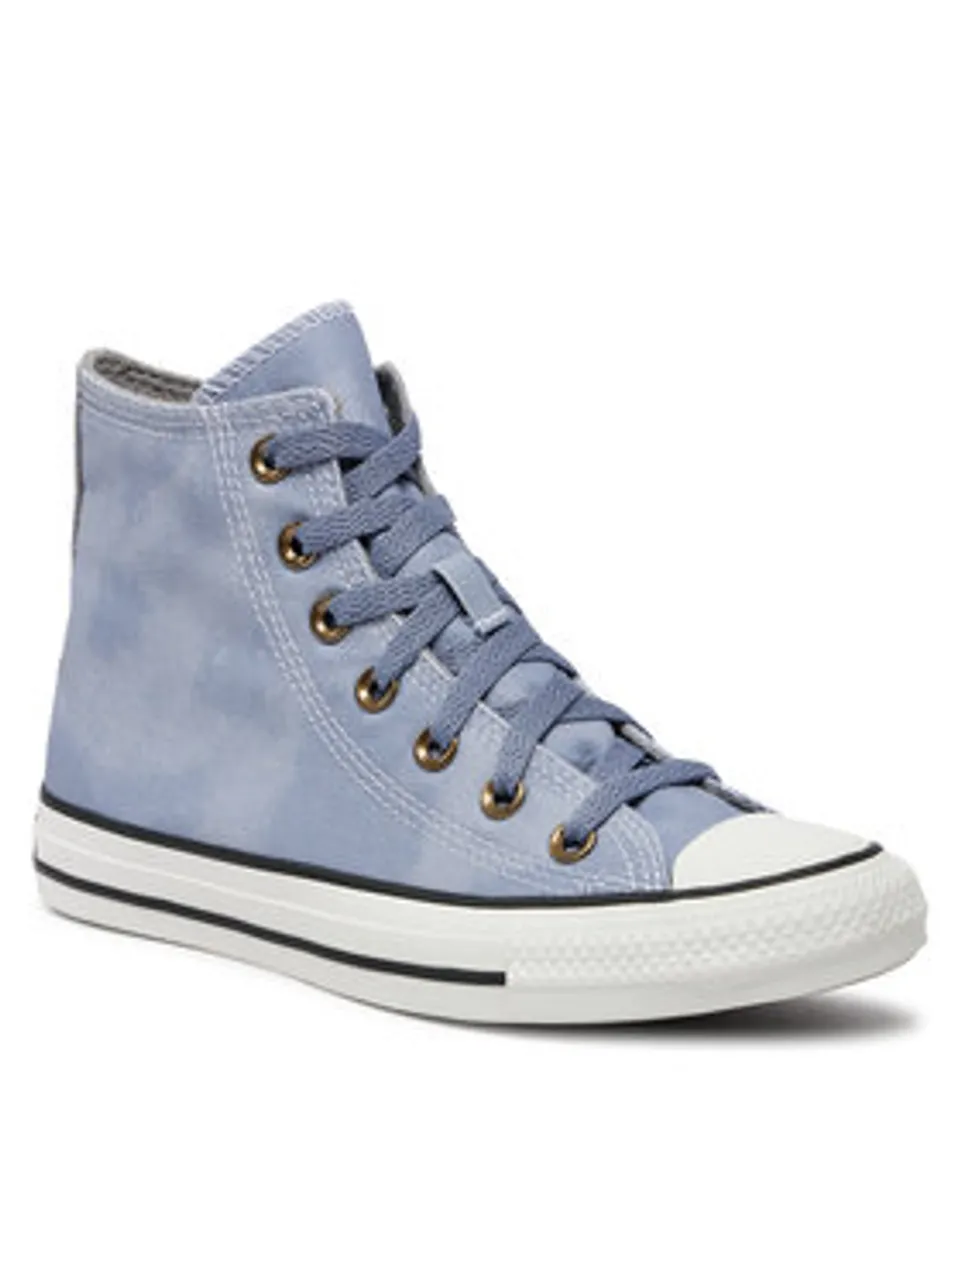 Converse Sneakers aus Stoff Chuck Taylor All Star Tie Dye A06585C Violett